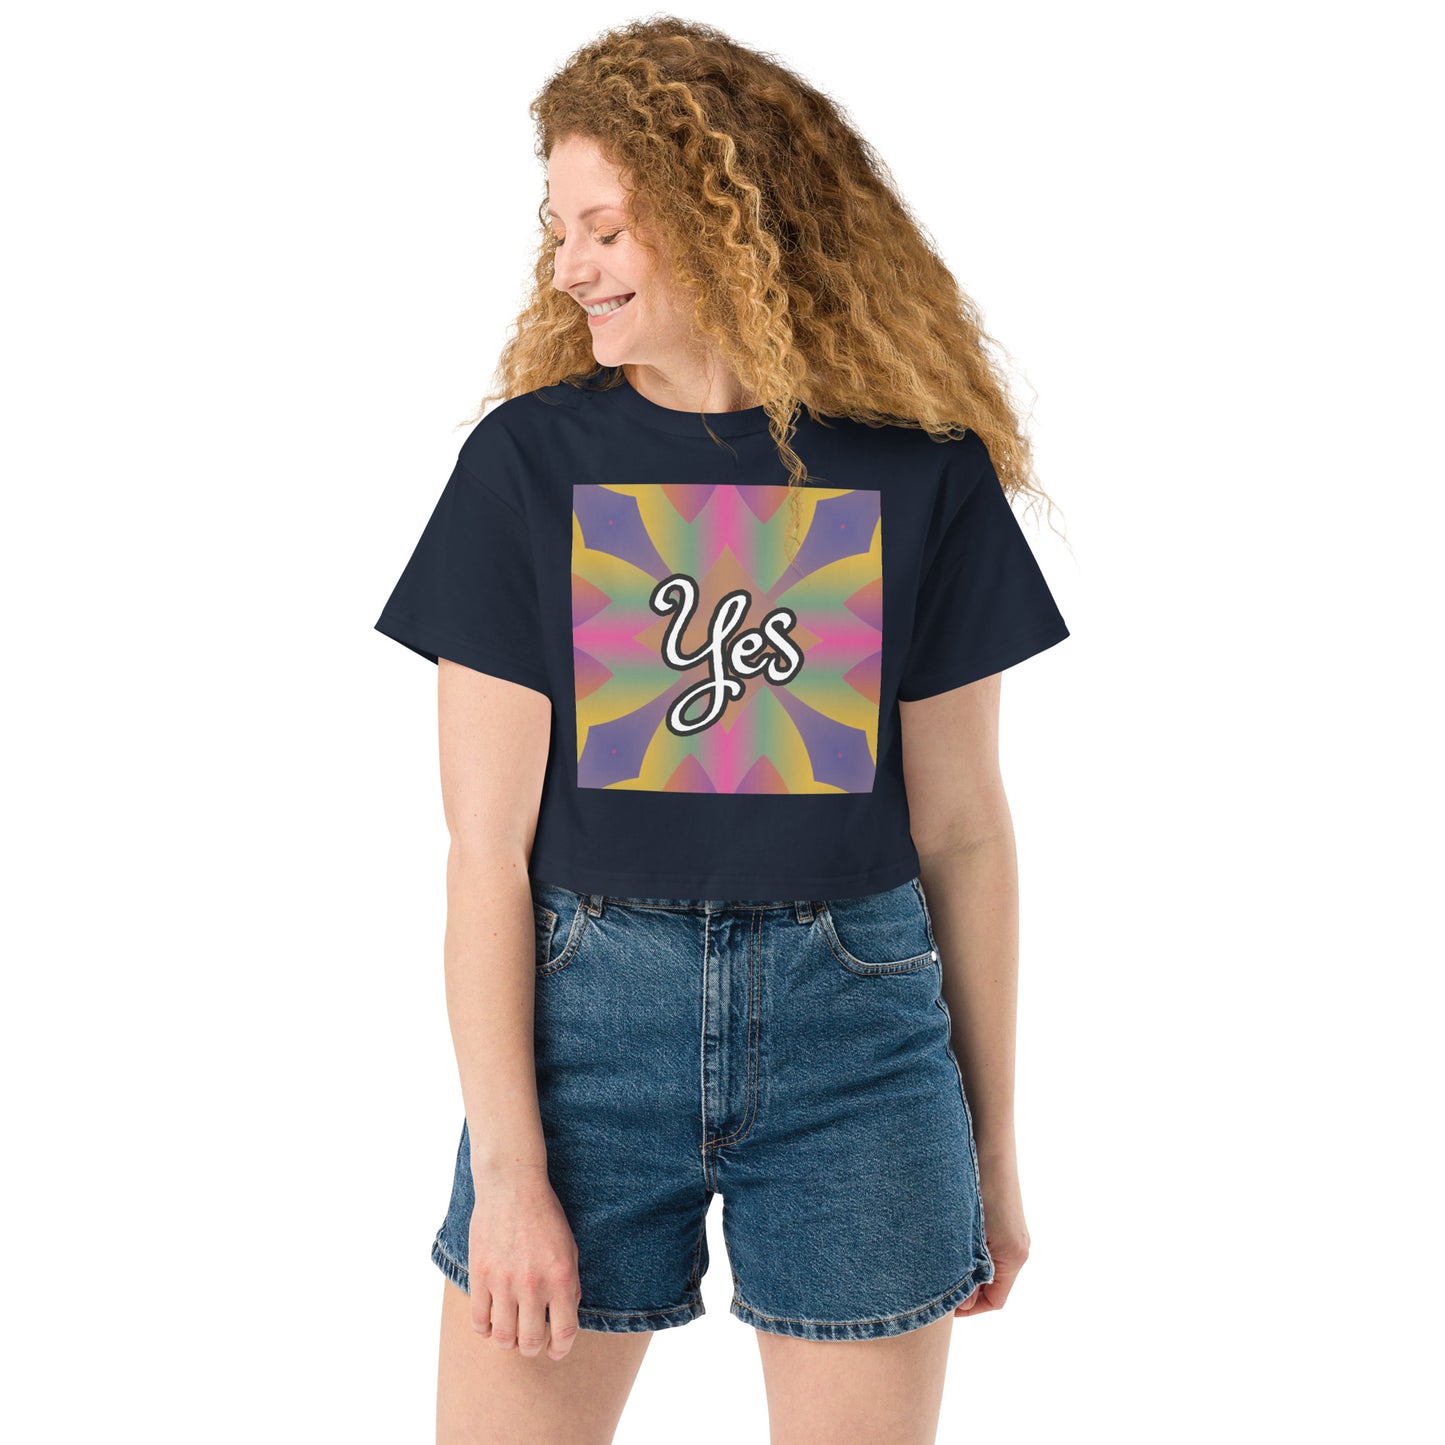 Yes - Champion crop top